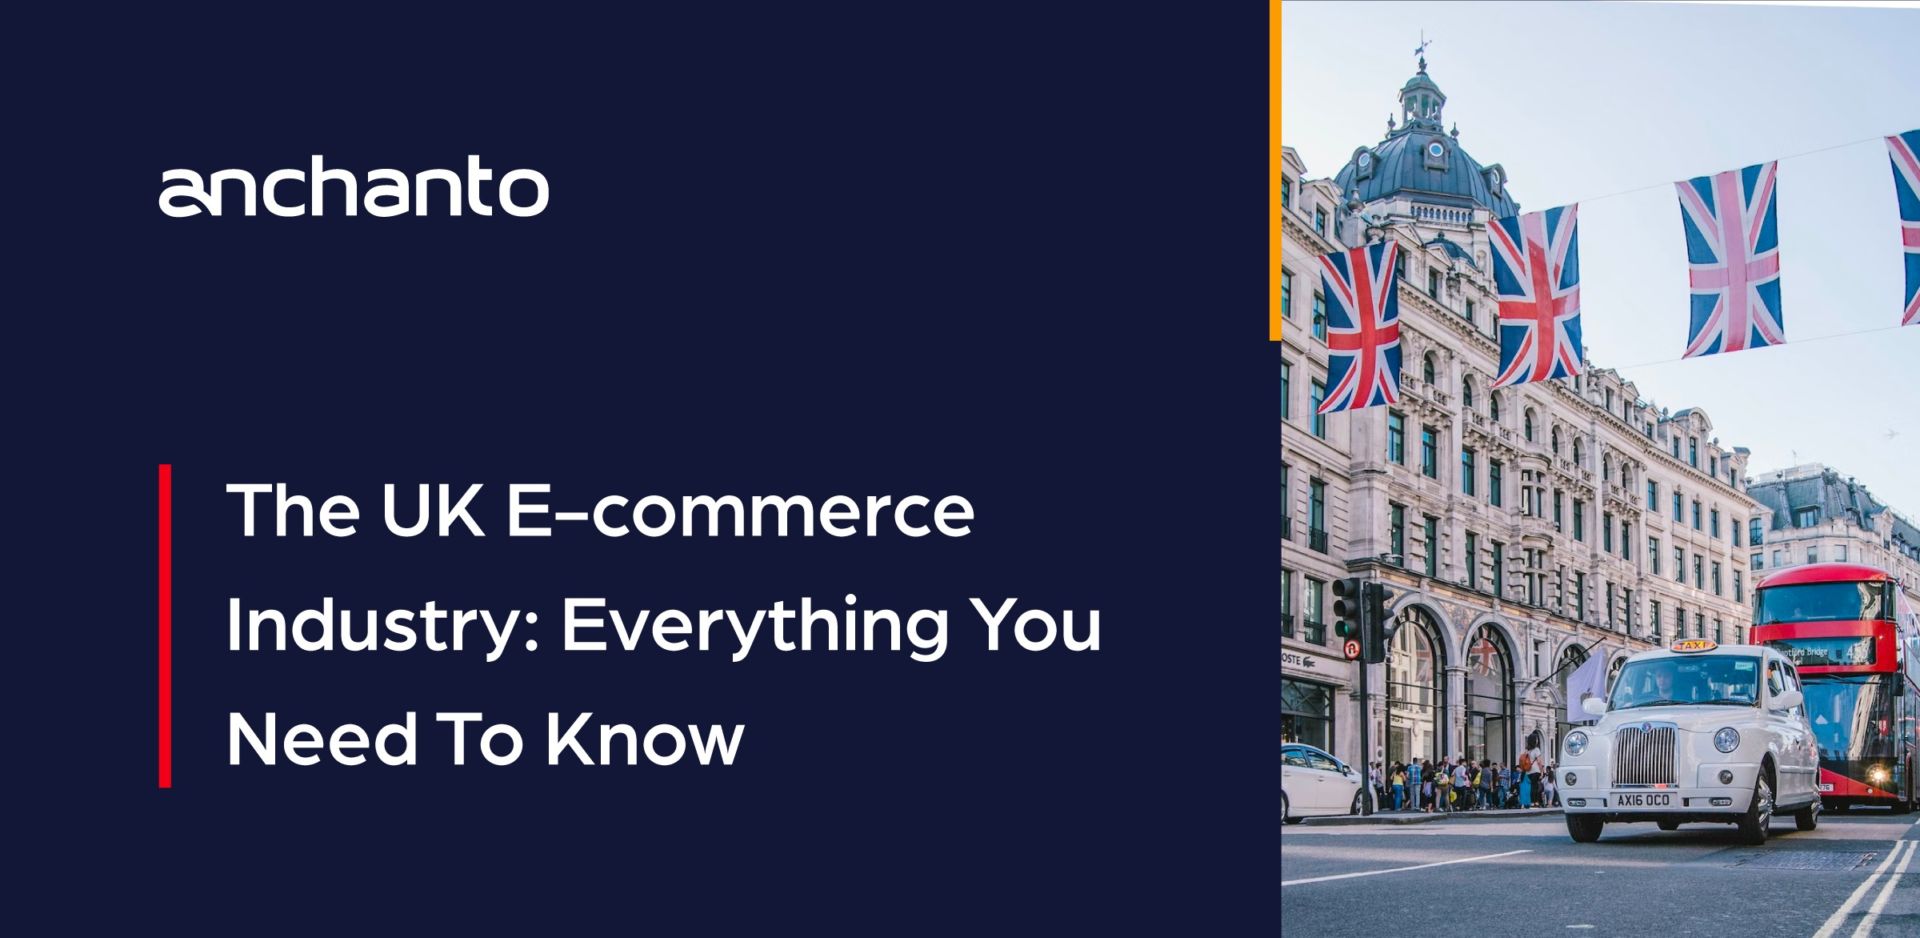 The UK E-commerce Industry: Everything You Need To Know